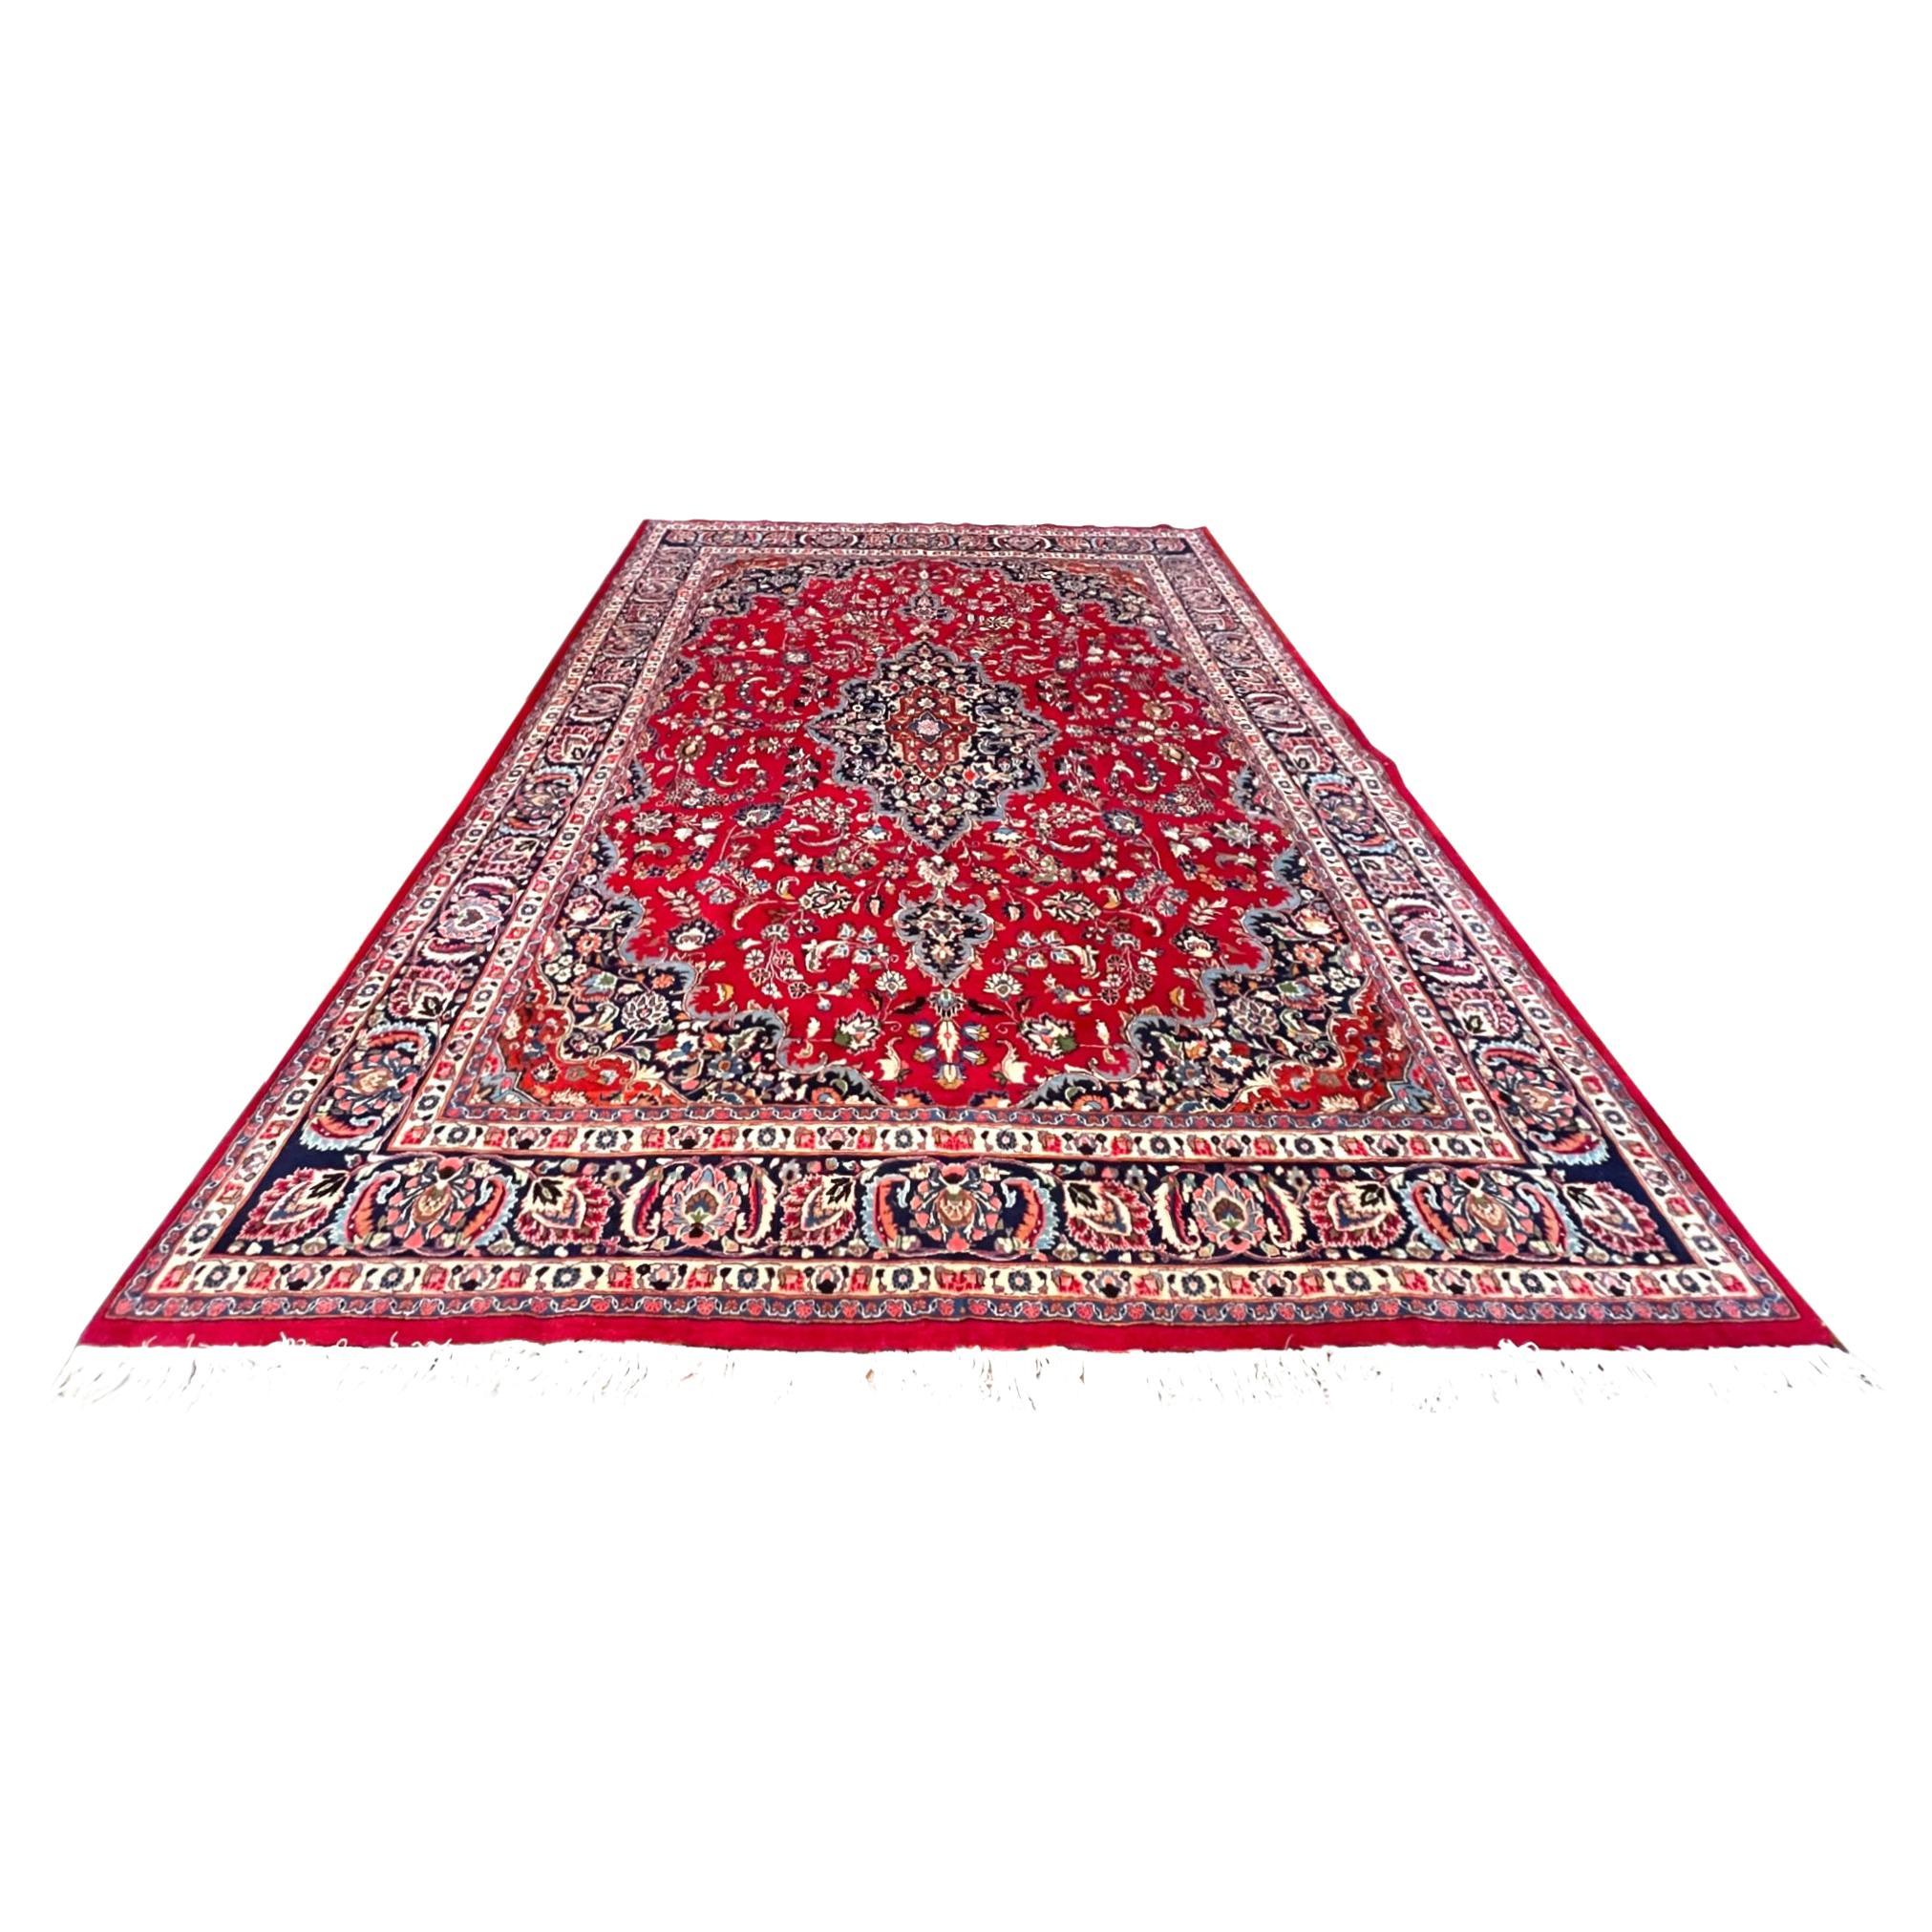 Authentic Persian Hand Knotted Medallion Floral Red Blue Mashad Rug, Circa 1960